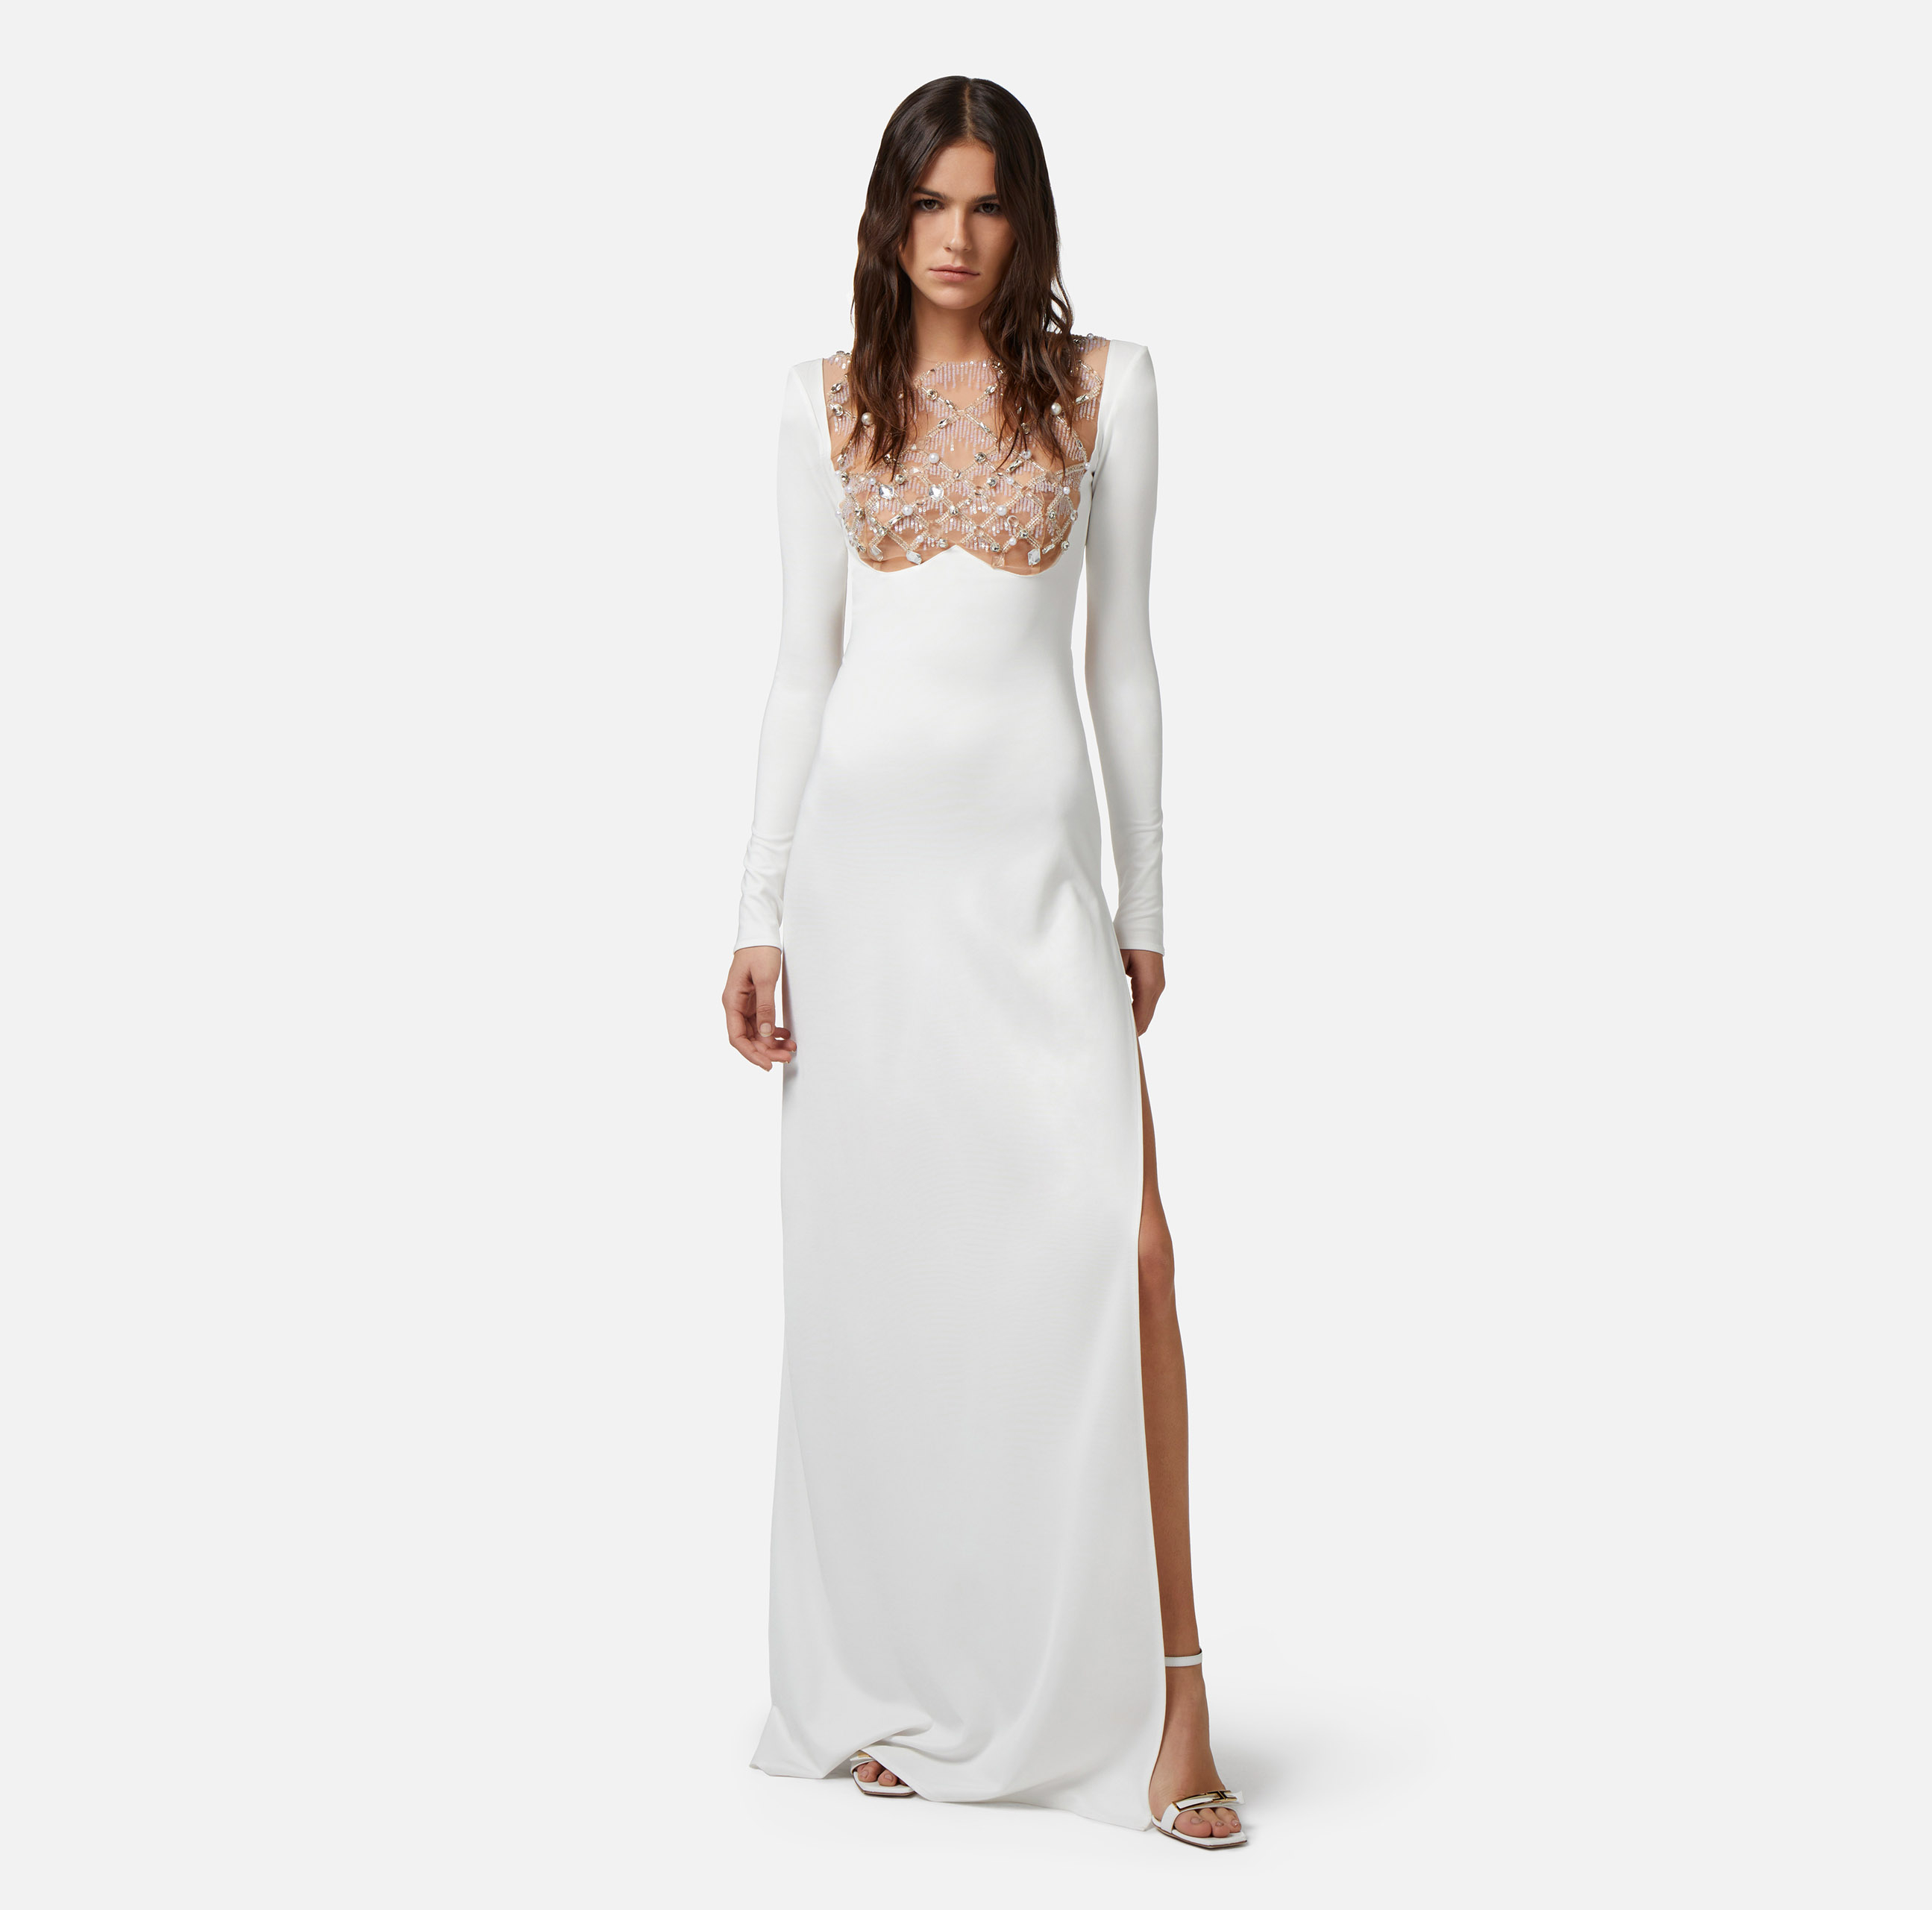 Red Carpet dress in jersey with embroidered bib - Elisabetta Franchi